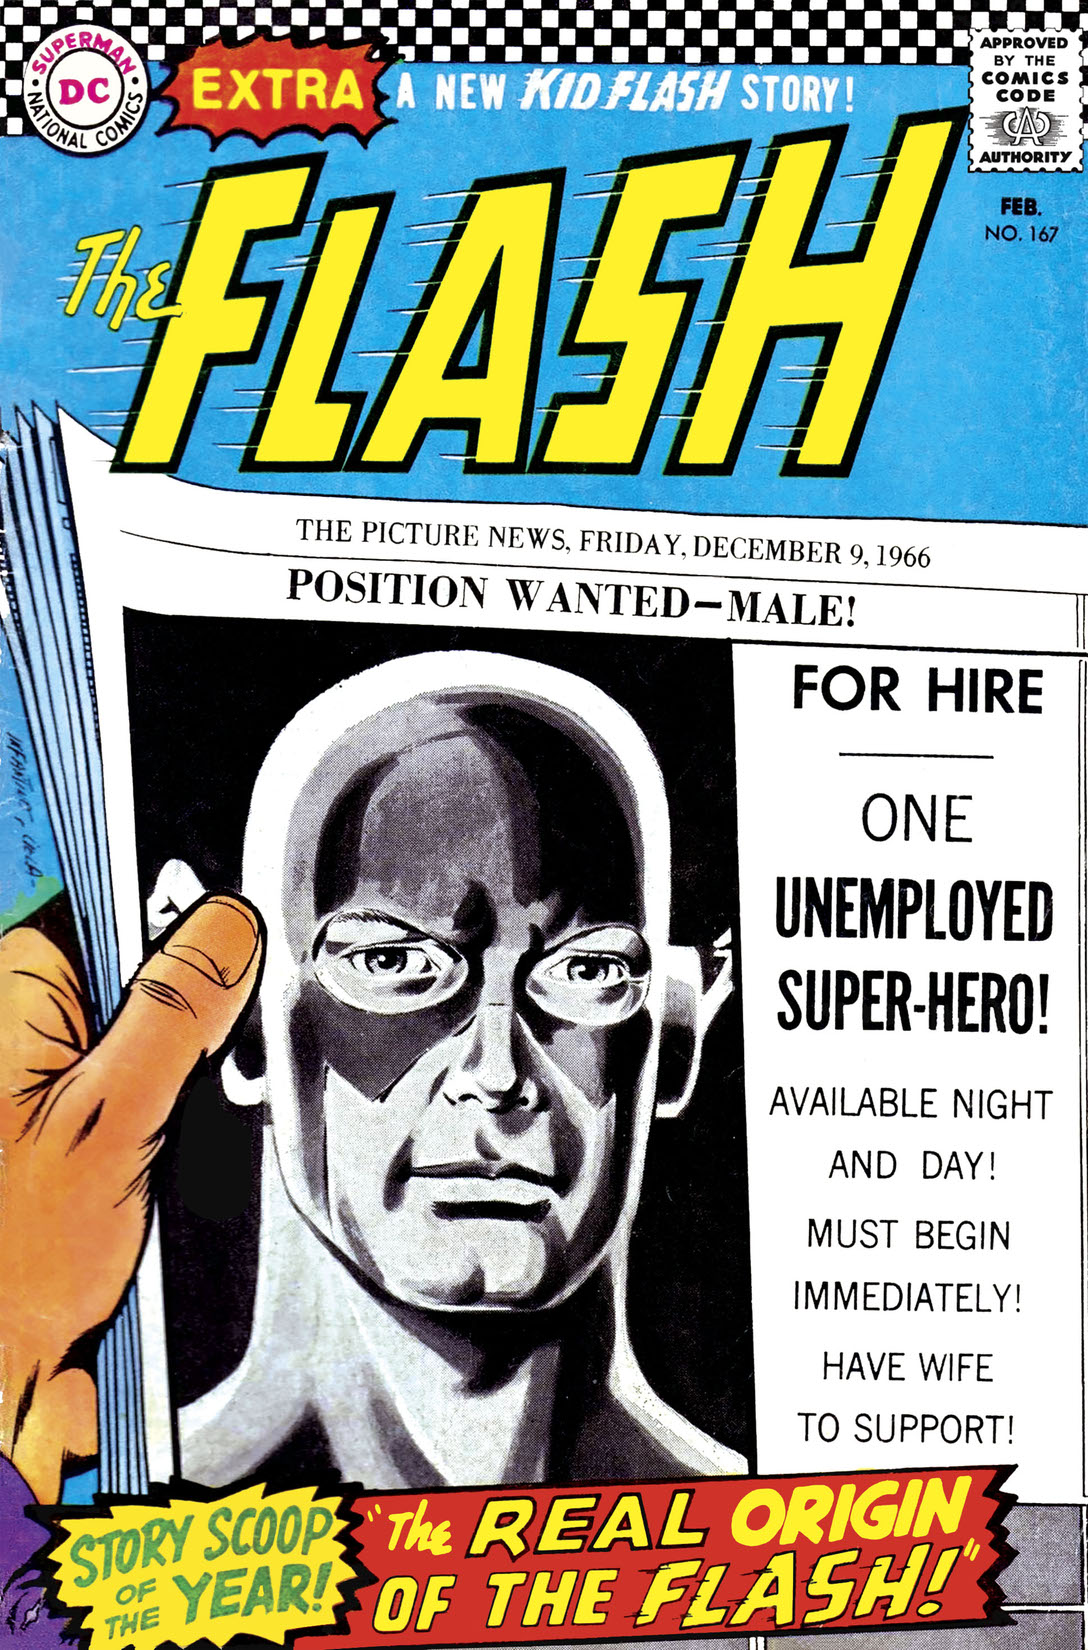 The Flash (1959-) #167 preview images